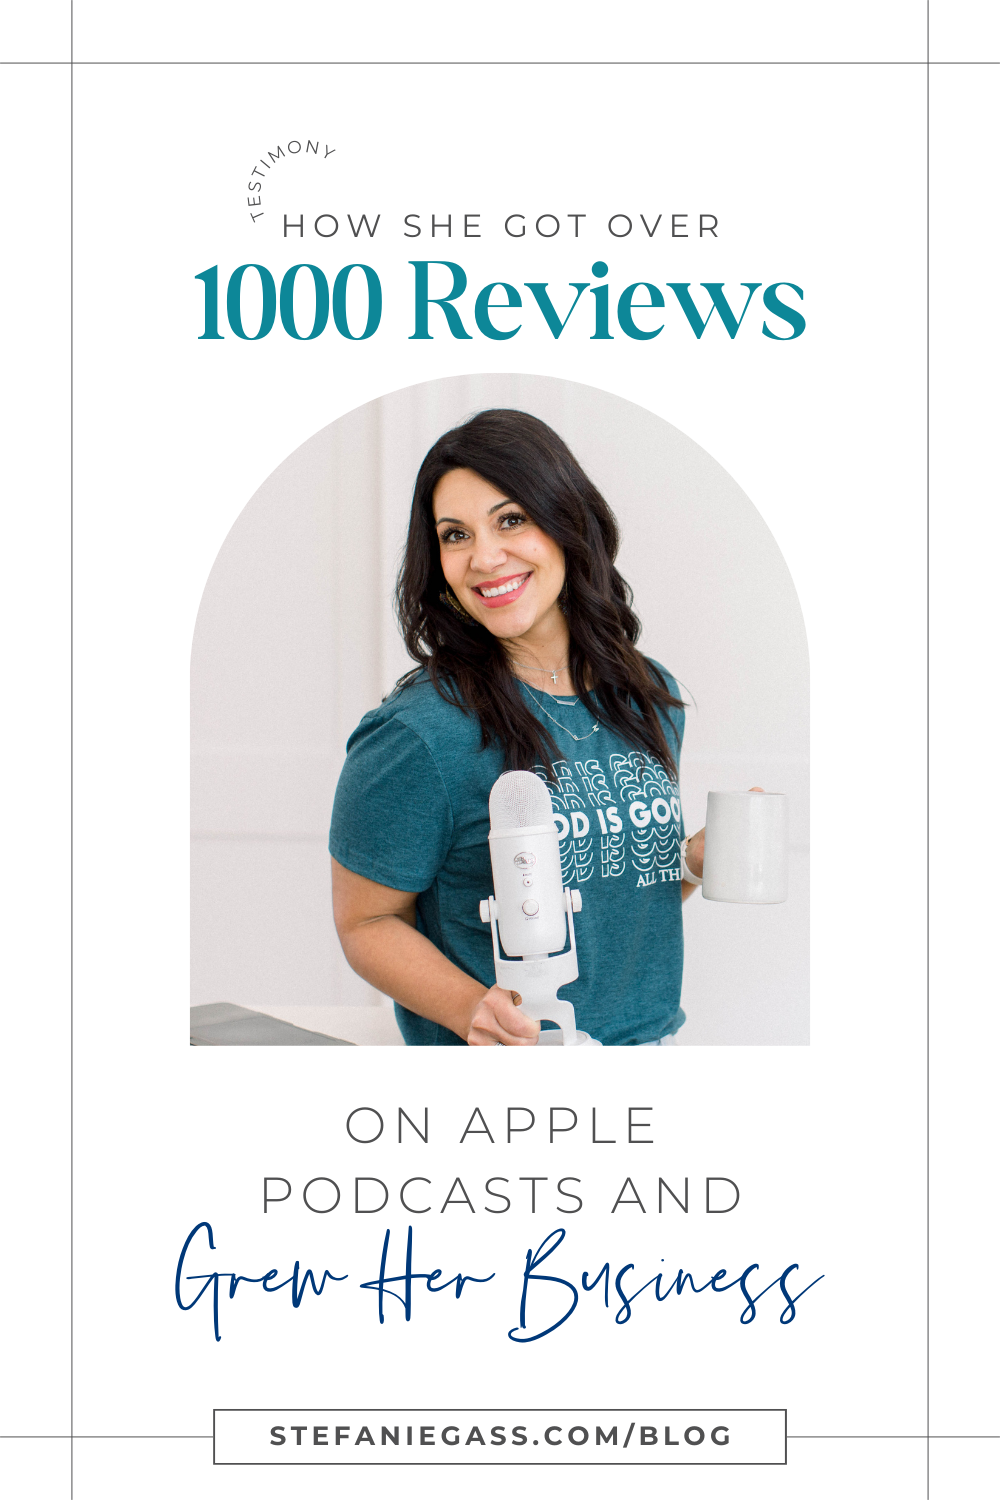 Brown haired woman wearing a teal t-shirt holding a podcasting microphone. Text says: How she got over 1000 reviews on apple podcasts and grew her business